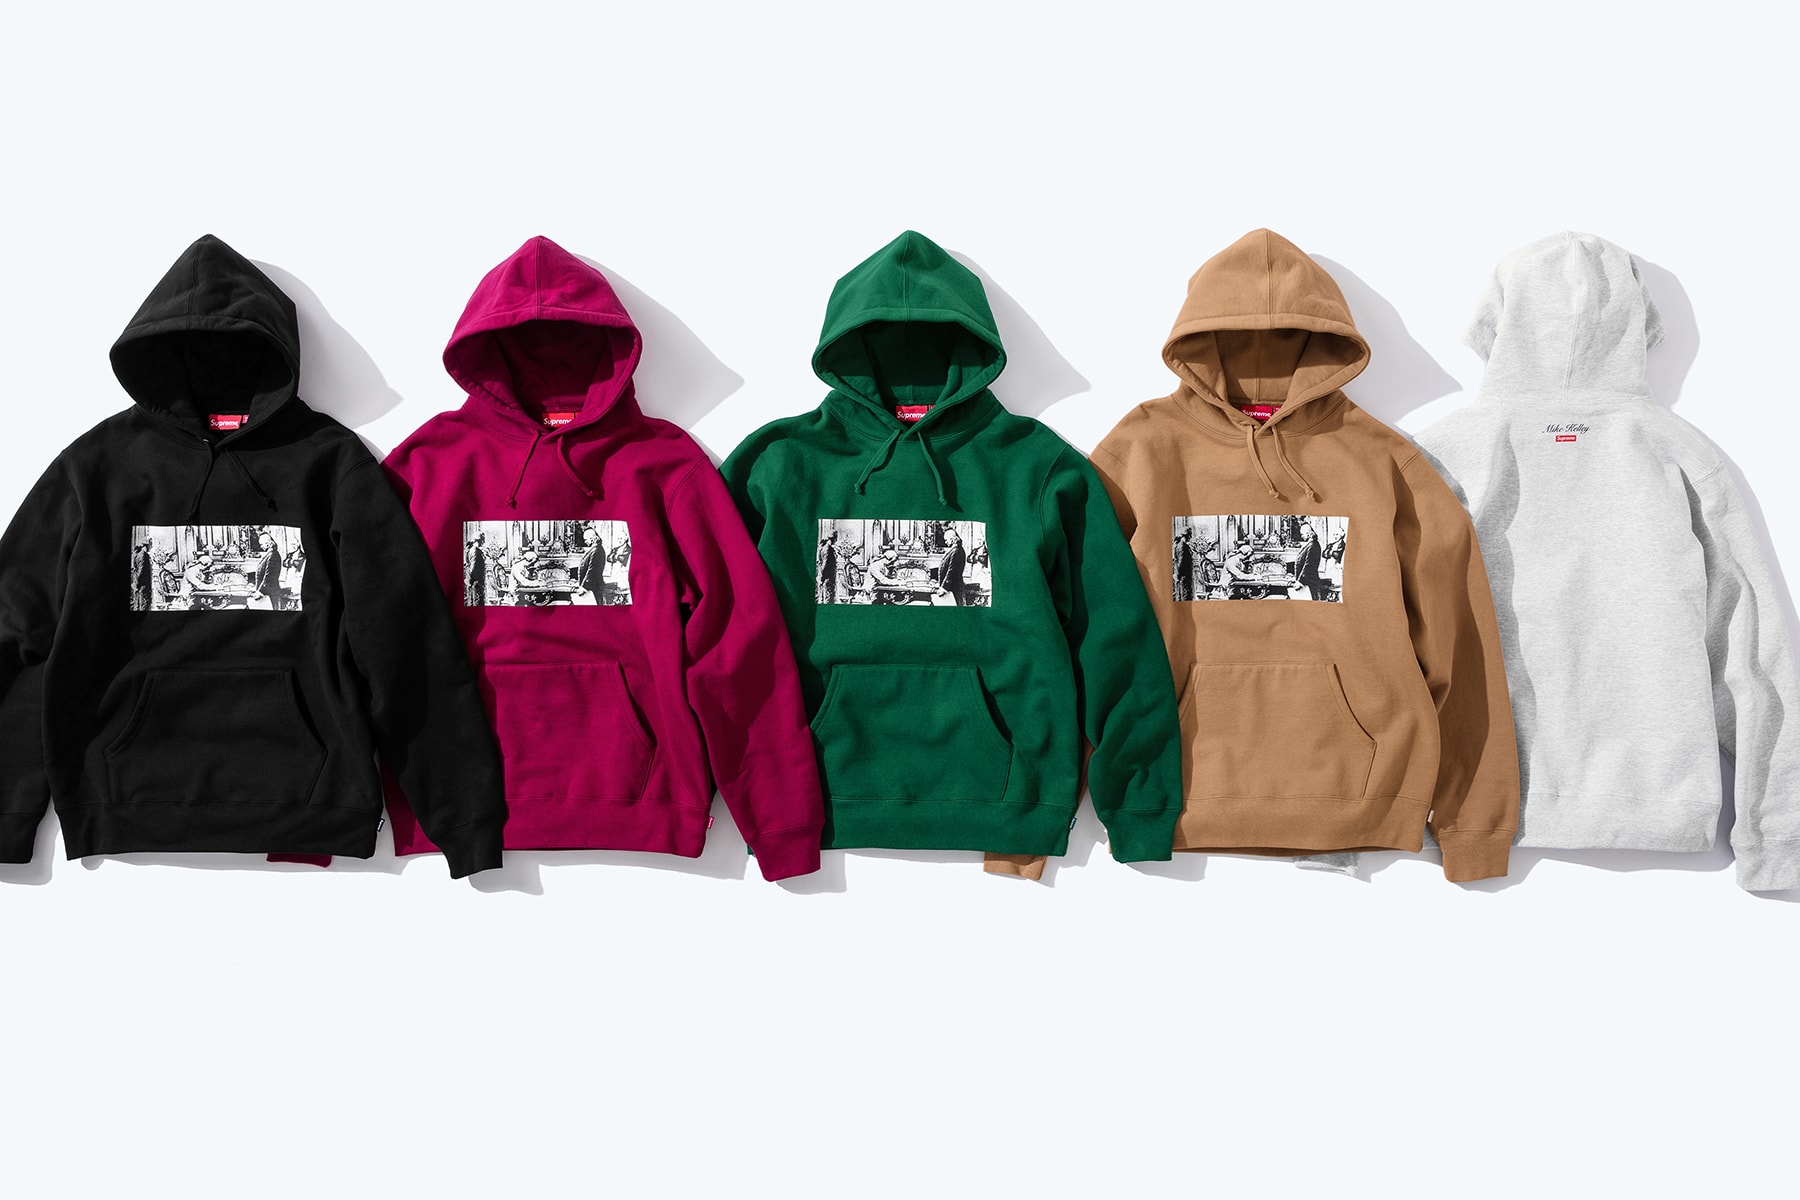 Supreme x Mike Kelley FW18 Release Art Contemporary Art Marcel Duchamp Readymade Michigan Detroit Music Sonic Youth Supreme Collaboration Hoodies Sweatshirts Work Jacket Destroy All Monsters MOMA Dadaists kitsch Conceptual Performance art